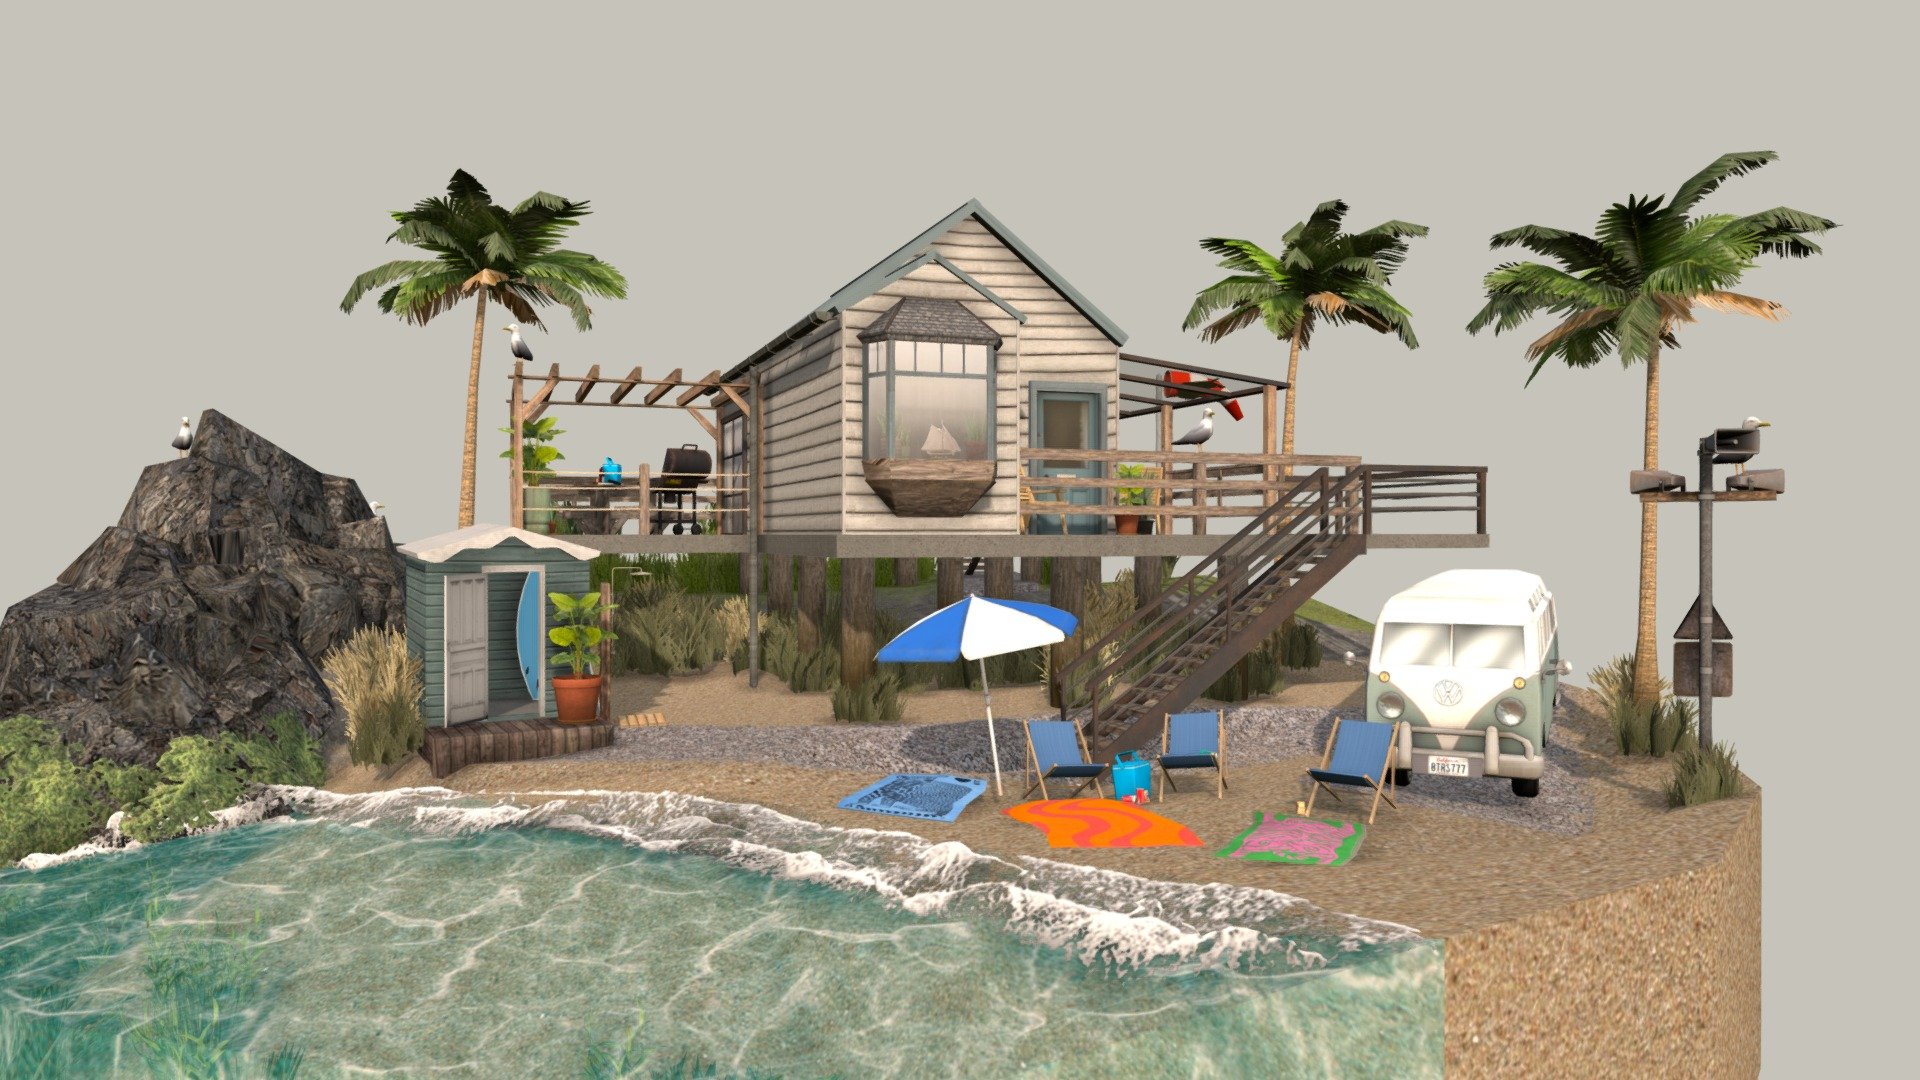 The result of my final for the 3D1 course at Howest DAE.

Everyone needs a break sometimes, that's why a group of friends meets up at this sunny Californian coast home once a year to escape each one of their busy worklives for a weekend filled with surfing, reading, continuing their D&amp;D campaign, sleeping and sunbathing 3d model